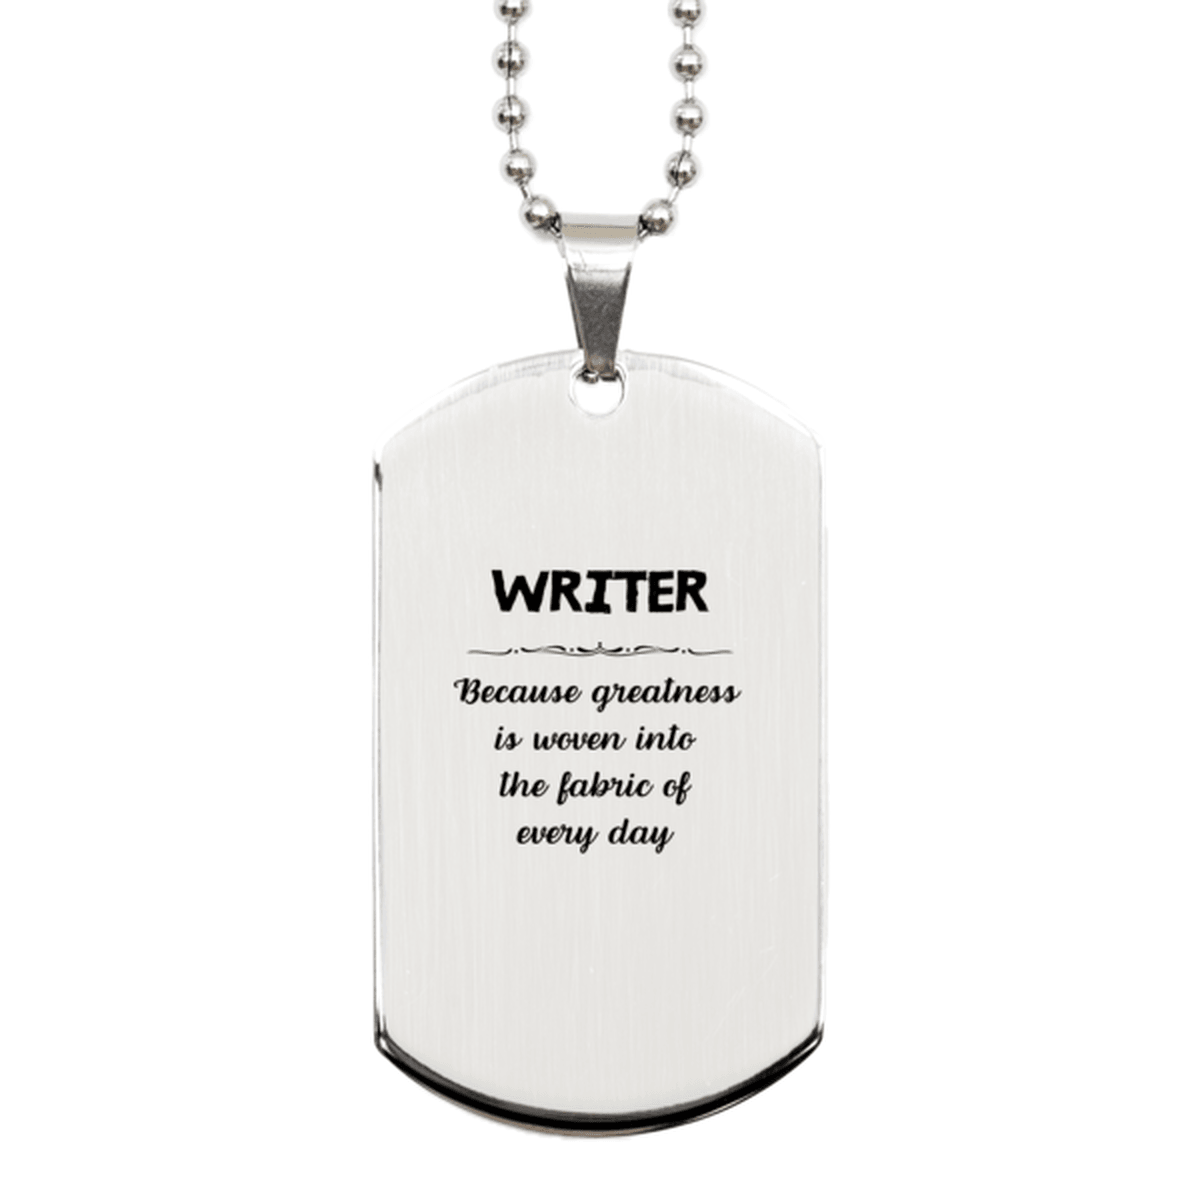 Sarcastic Writer Silver Dog Tag Gifts, Christmas Holiday Gifts for Writer Birthday, Writer: Because greatness is woven into the fabric of every day, Coworkers, Friends - Mallard Moon Gift Shop